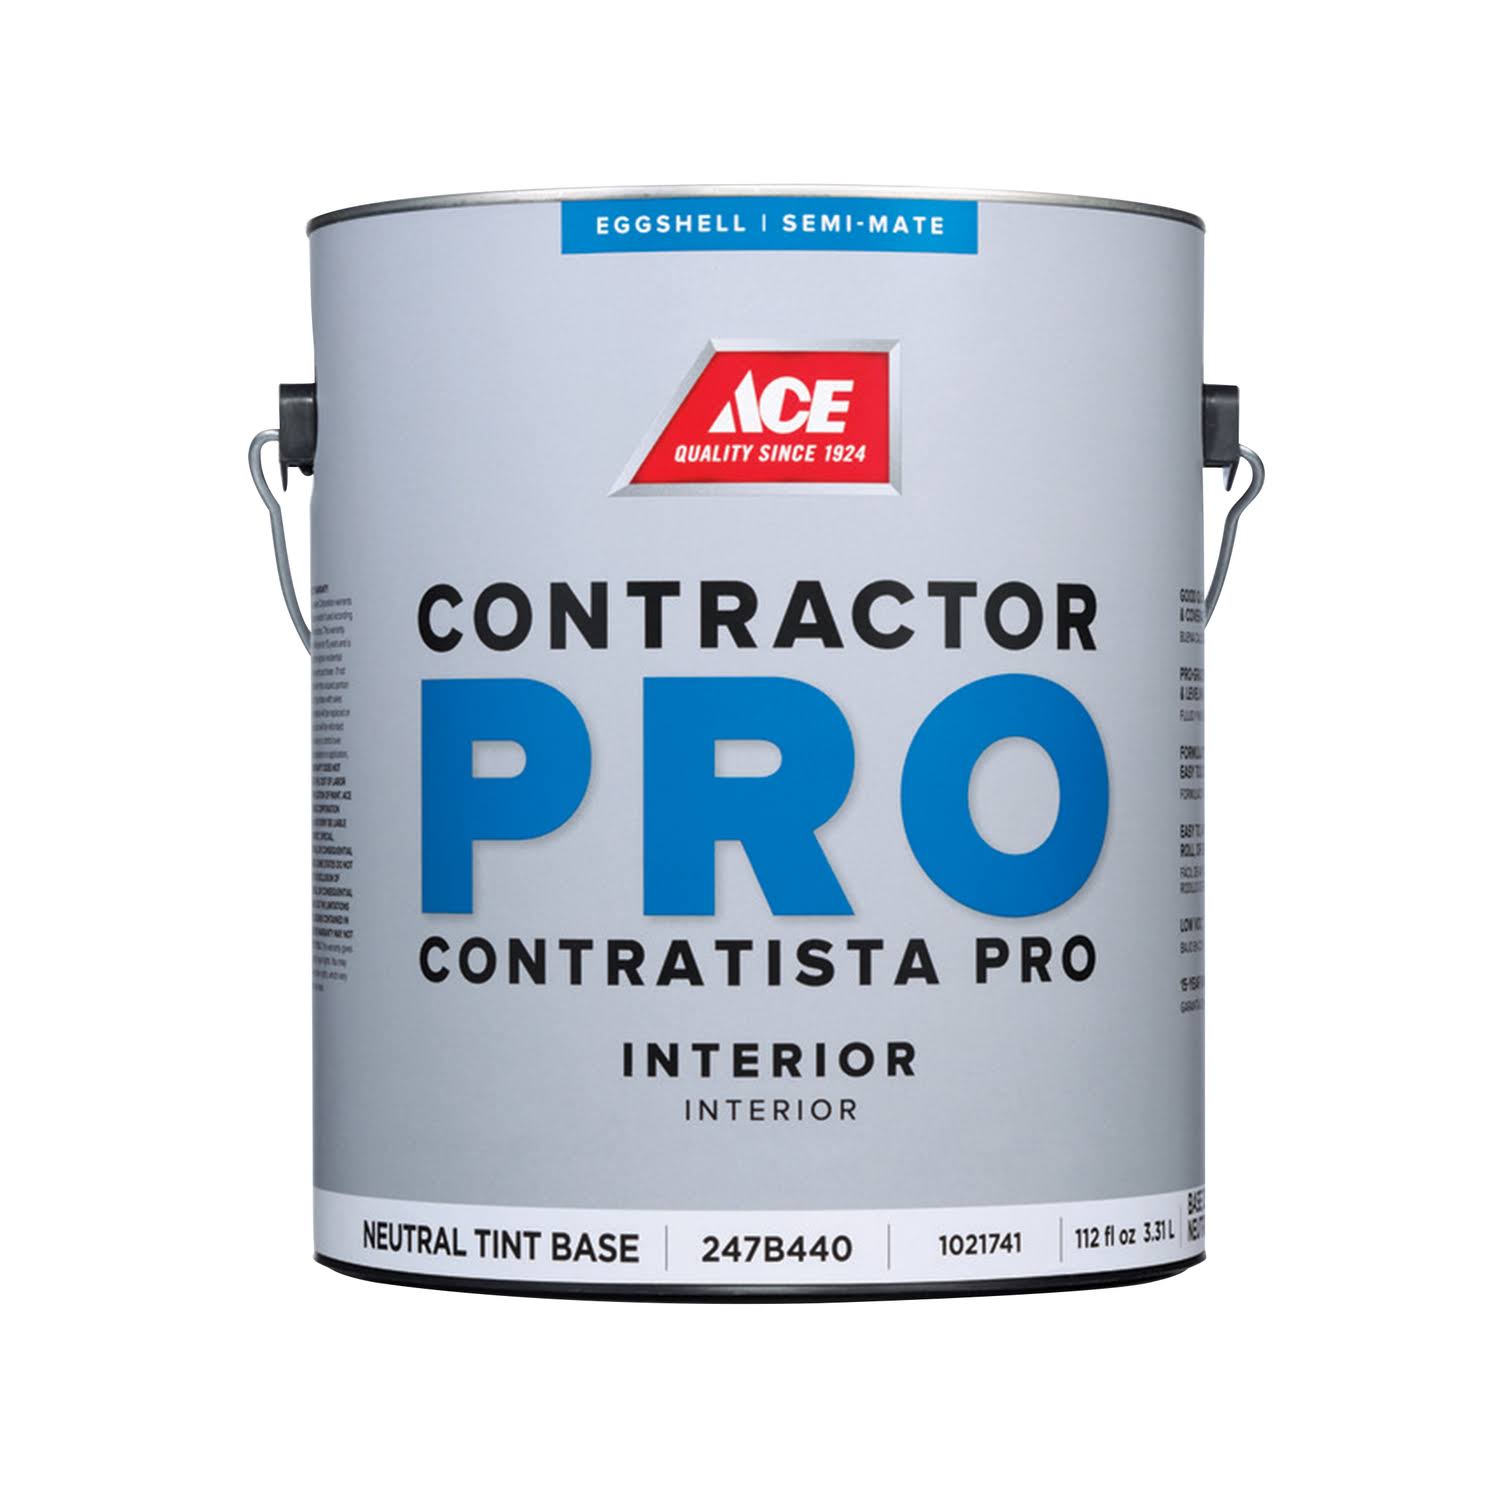 Ace Contractor Pro Eggshell Tint Base Neutral Base Latex Paint Indoor 1 gal.